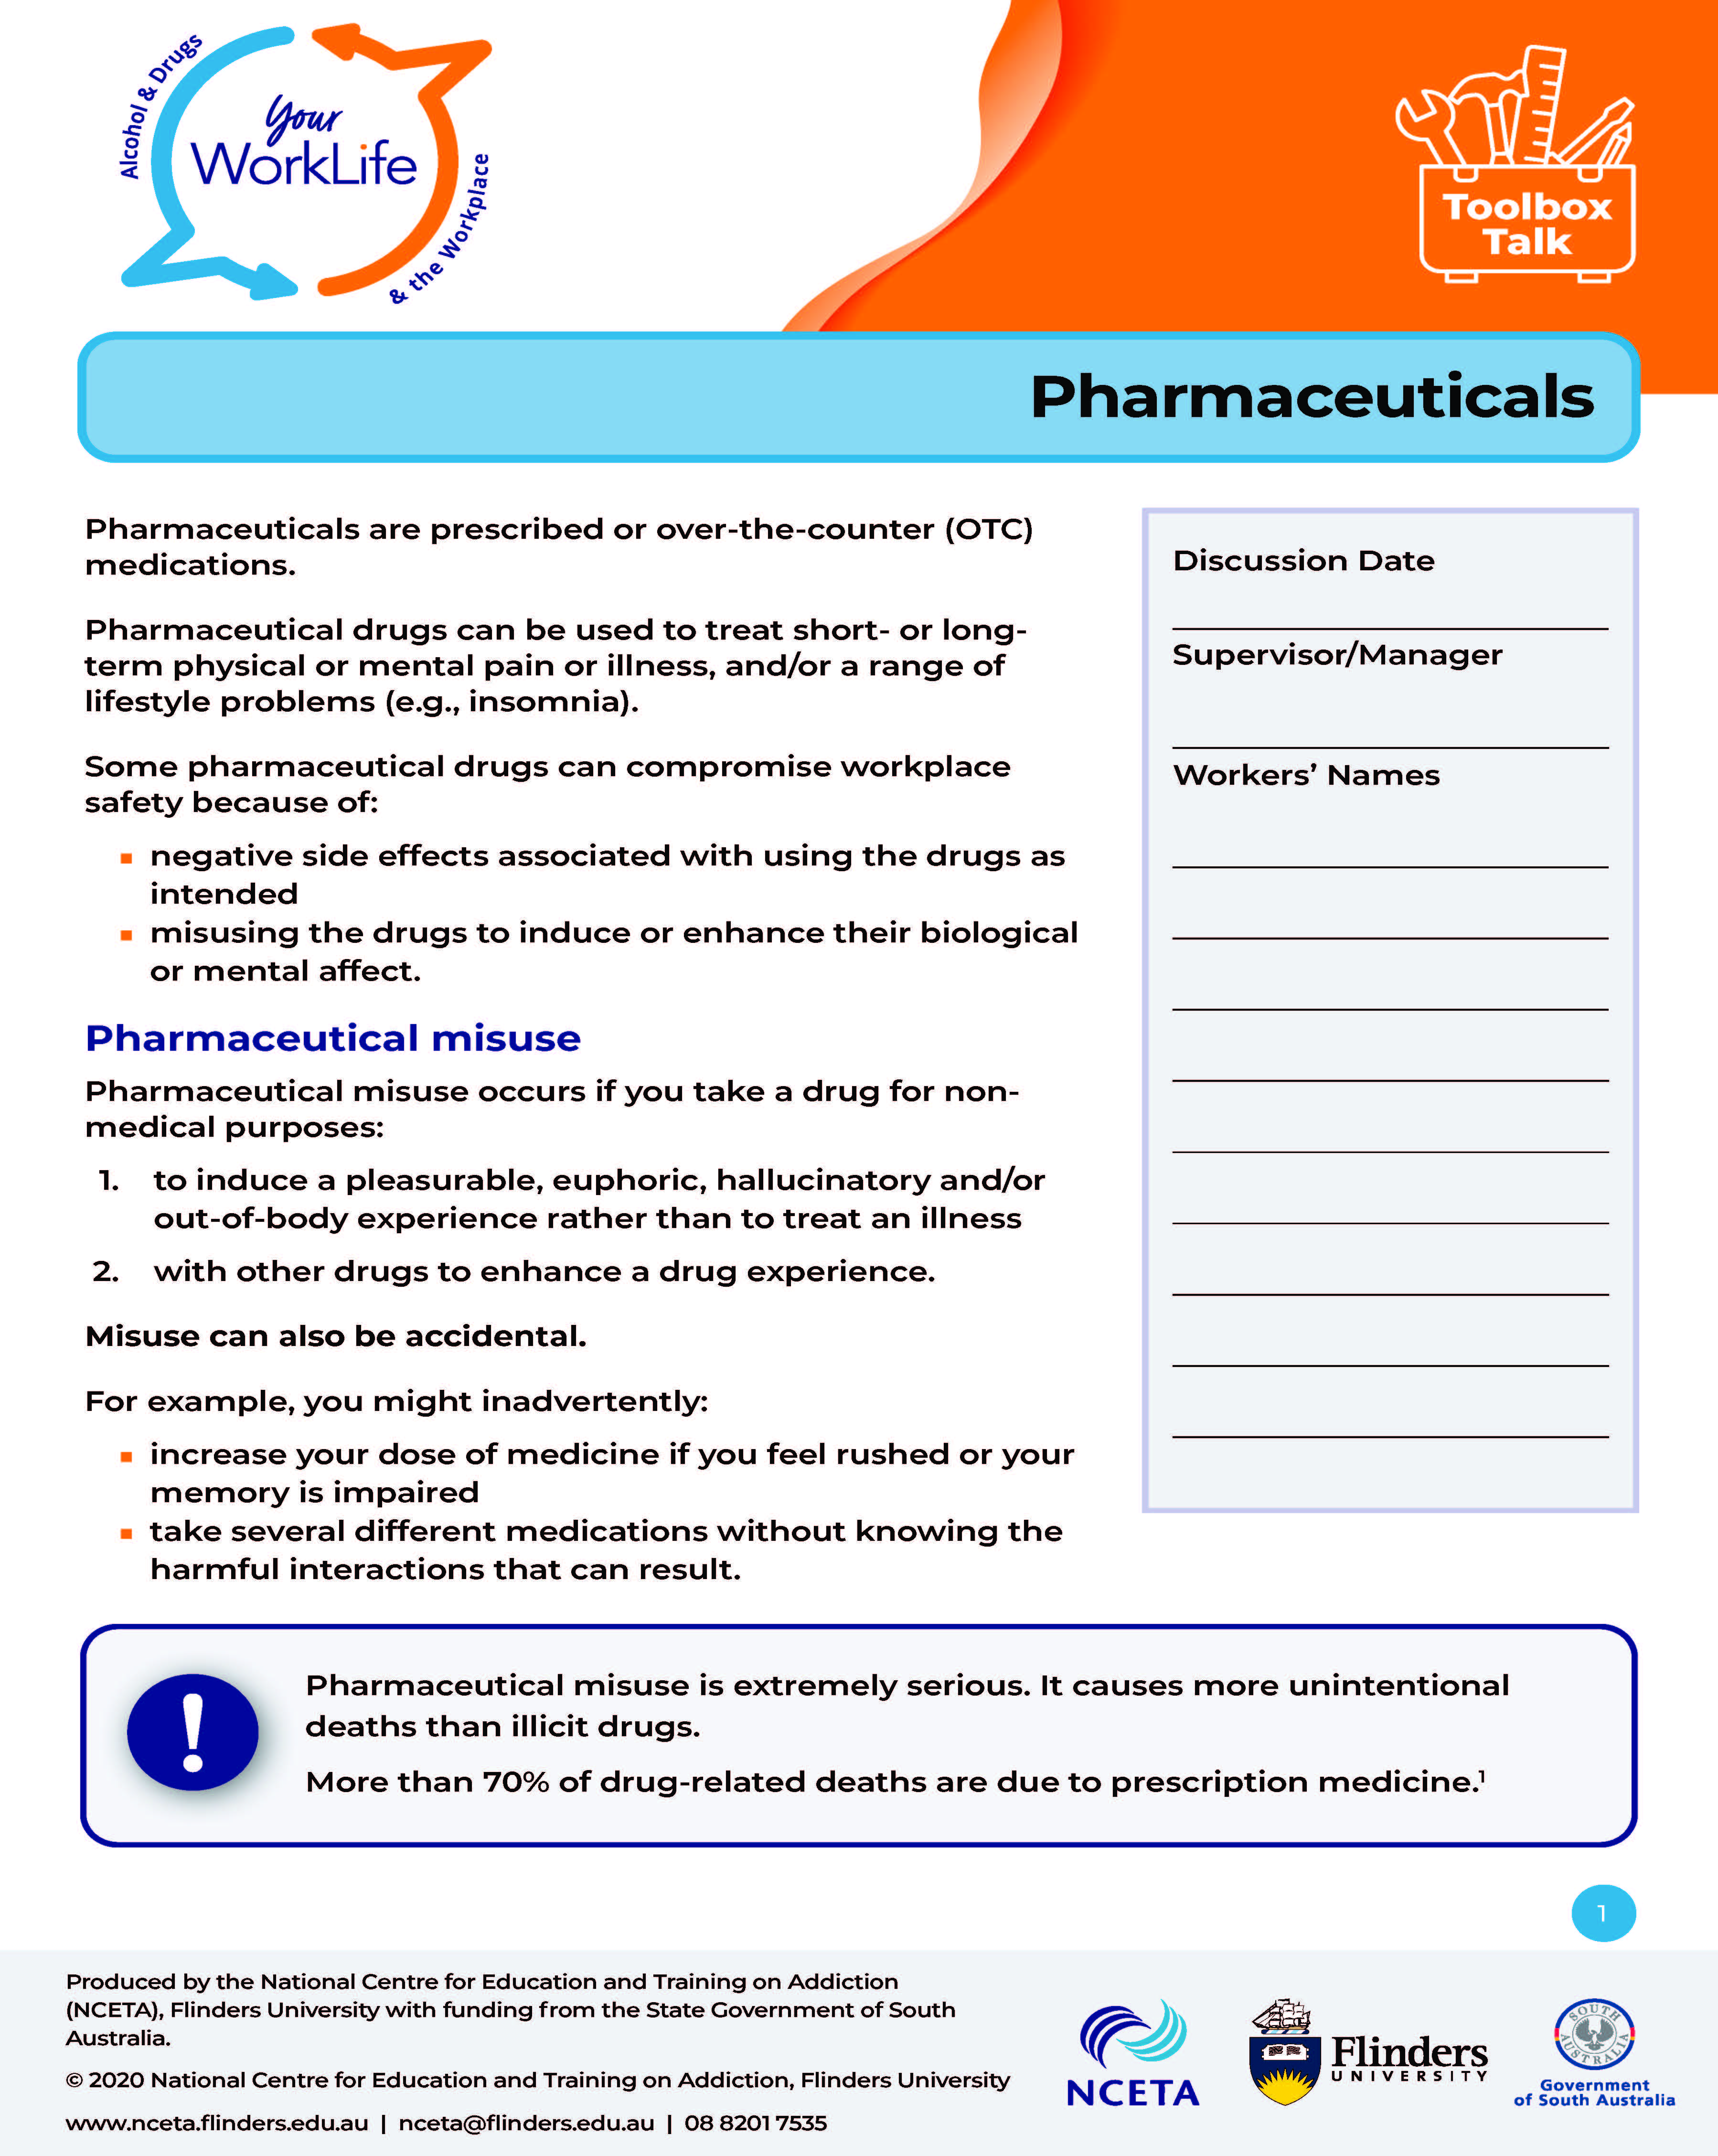 Front page-Toolbox-topic-pharmaceuticals 20200505.jpg